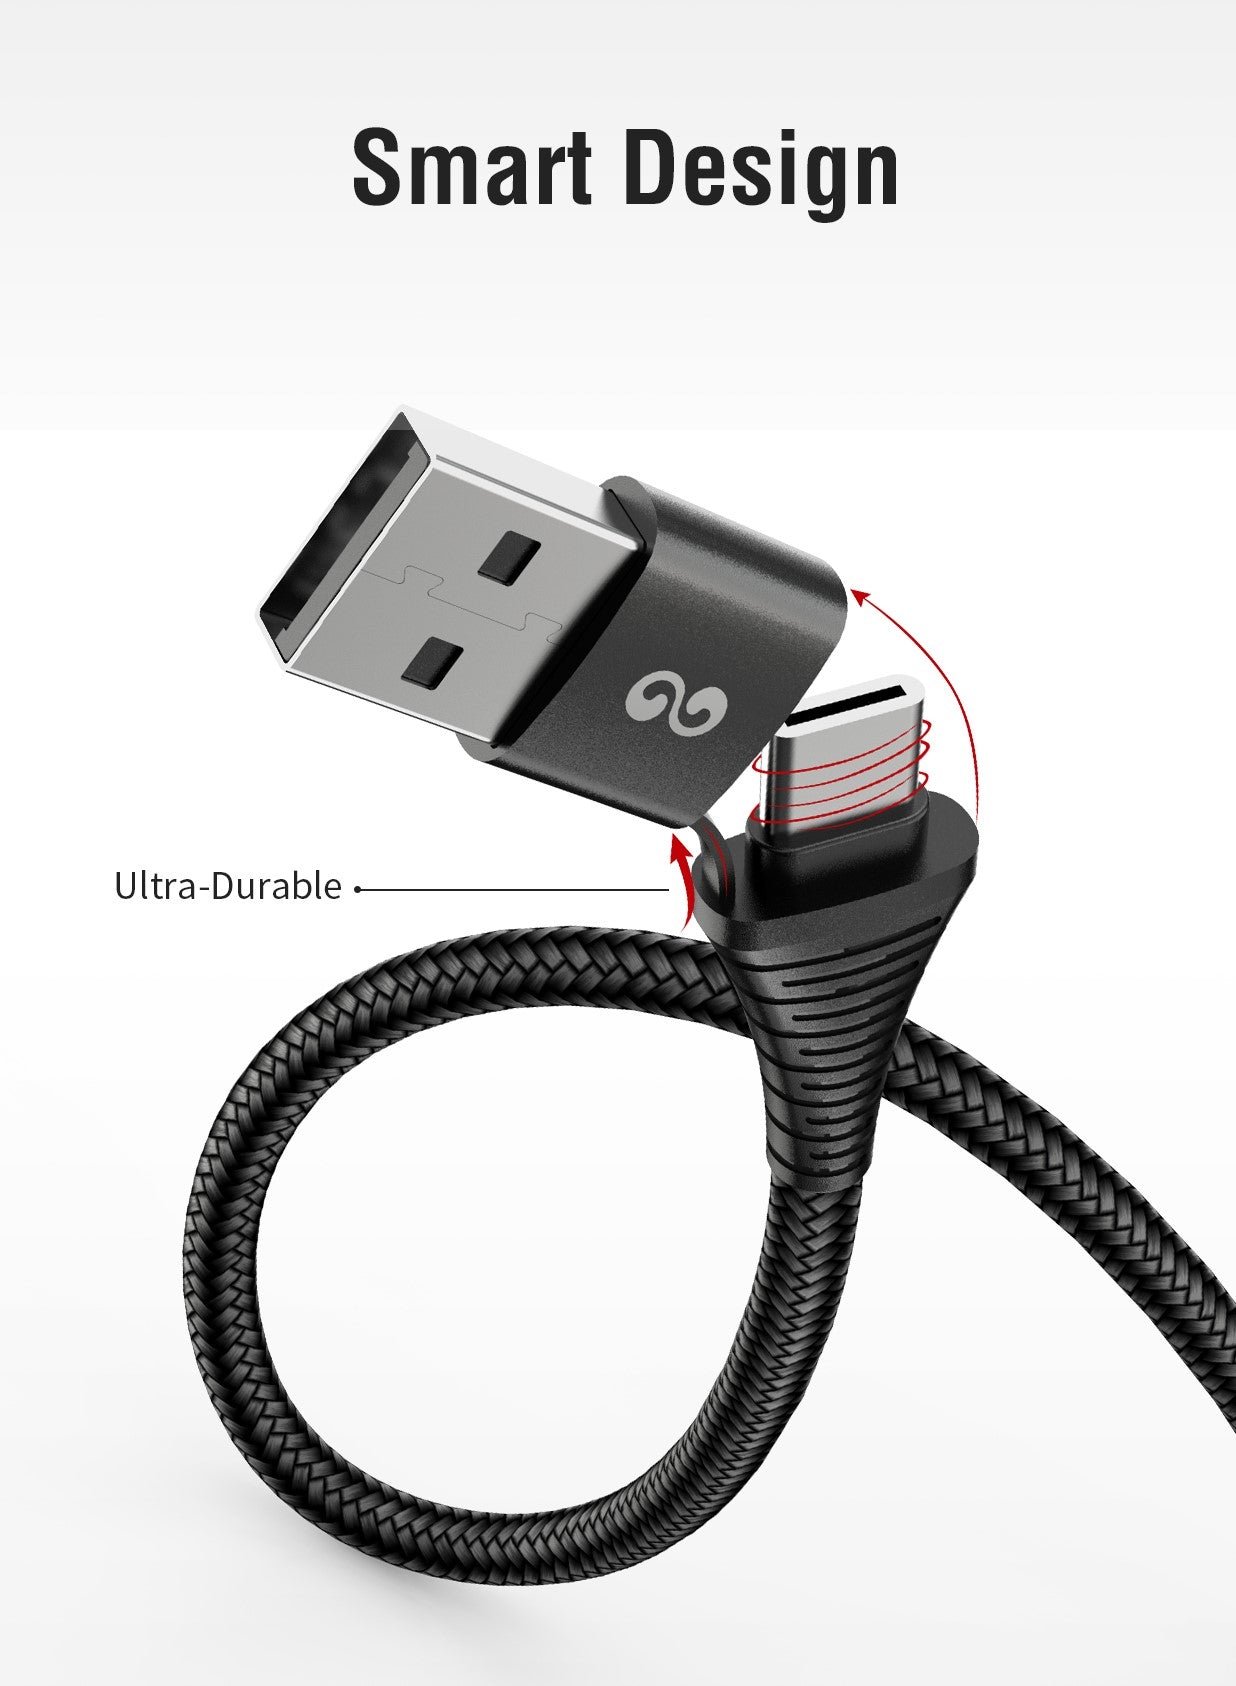 iWalk 60W Twister Duo 4 In 1 Multi Charging Cable PD & QC 3.0 1M Charge And Sync Cable - Black